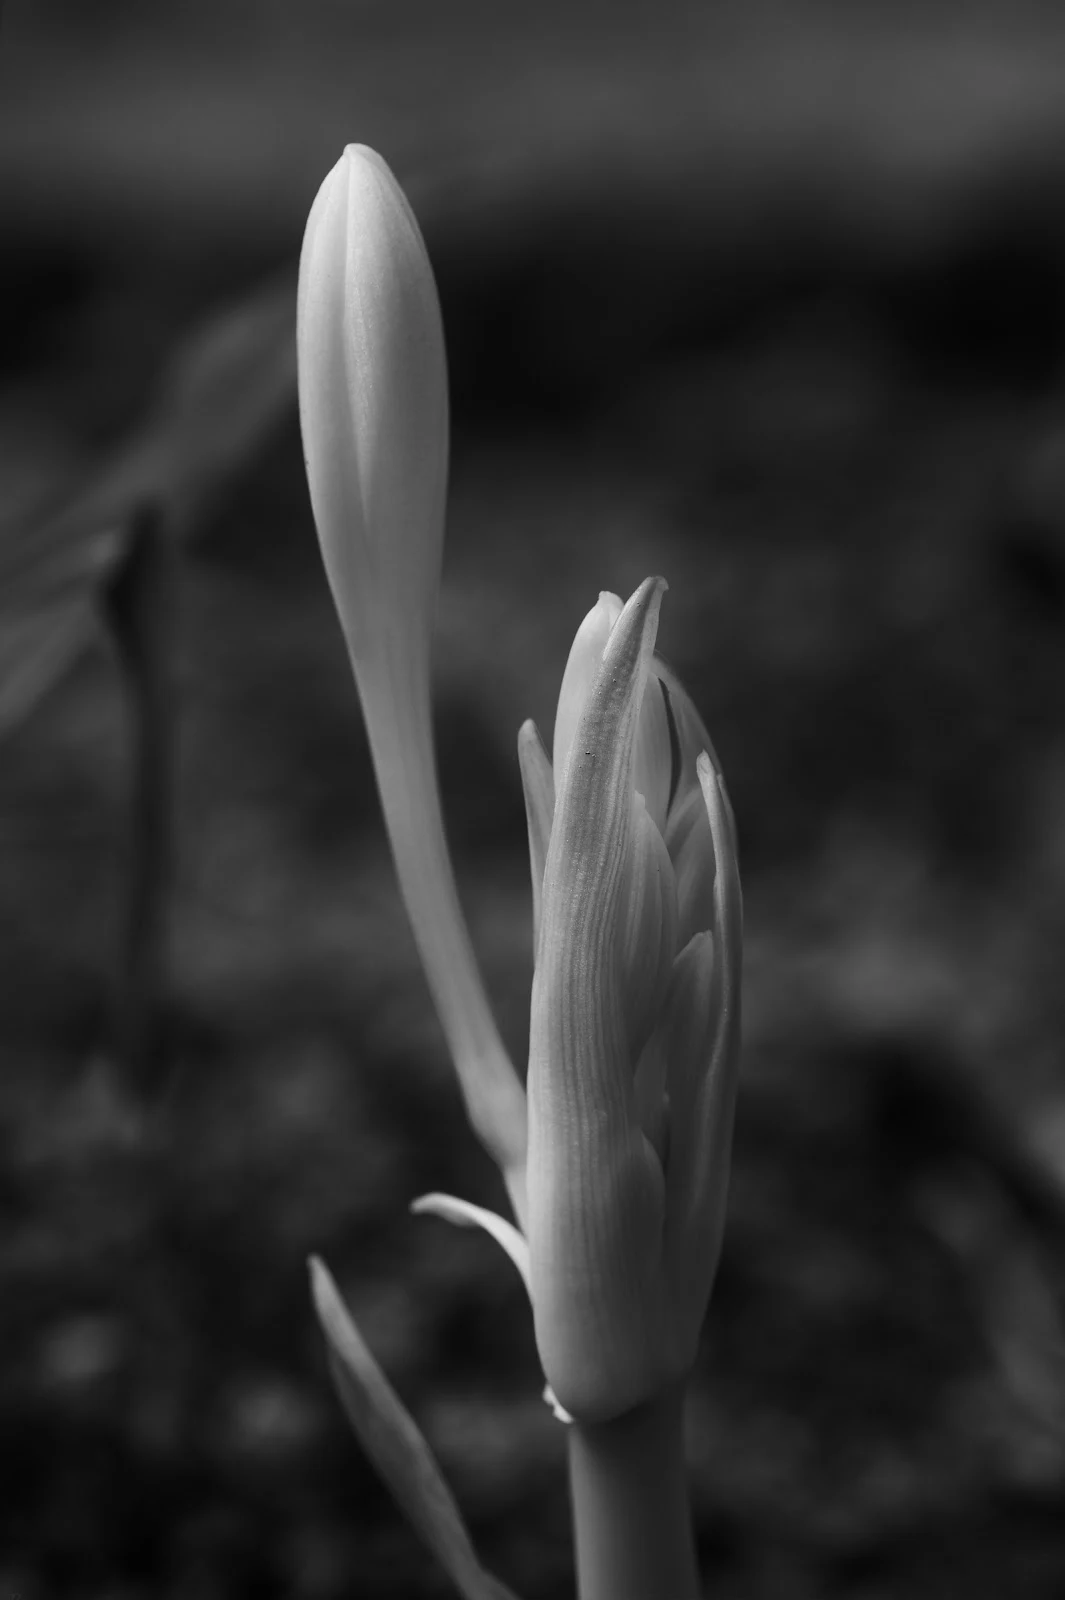 In the last week this plant has burst forth and is stretching for the Light. This shot feels better in Black & White.